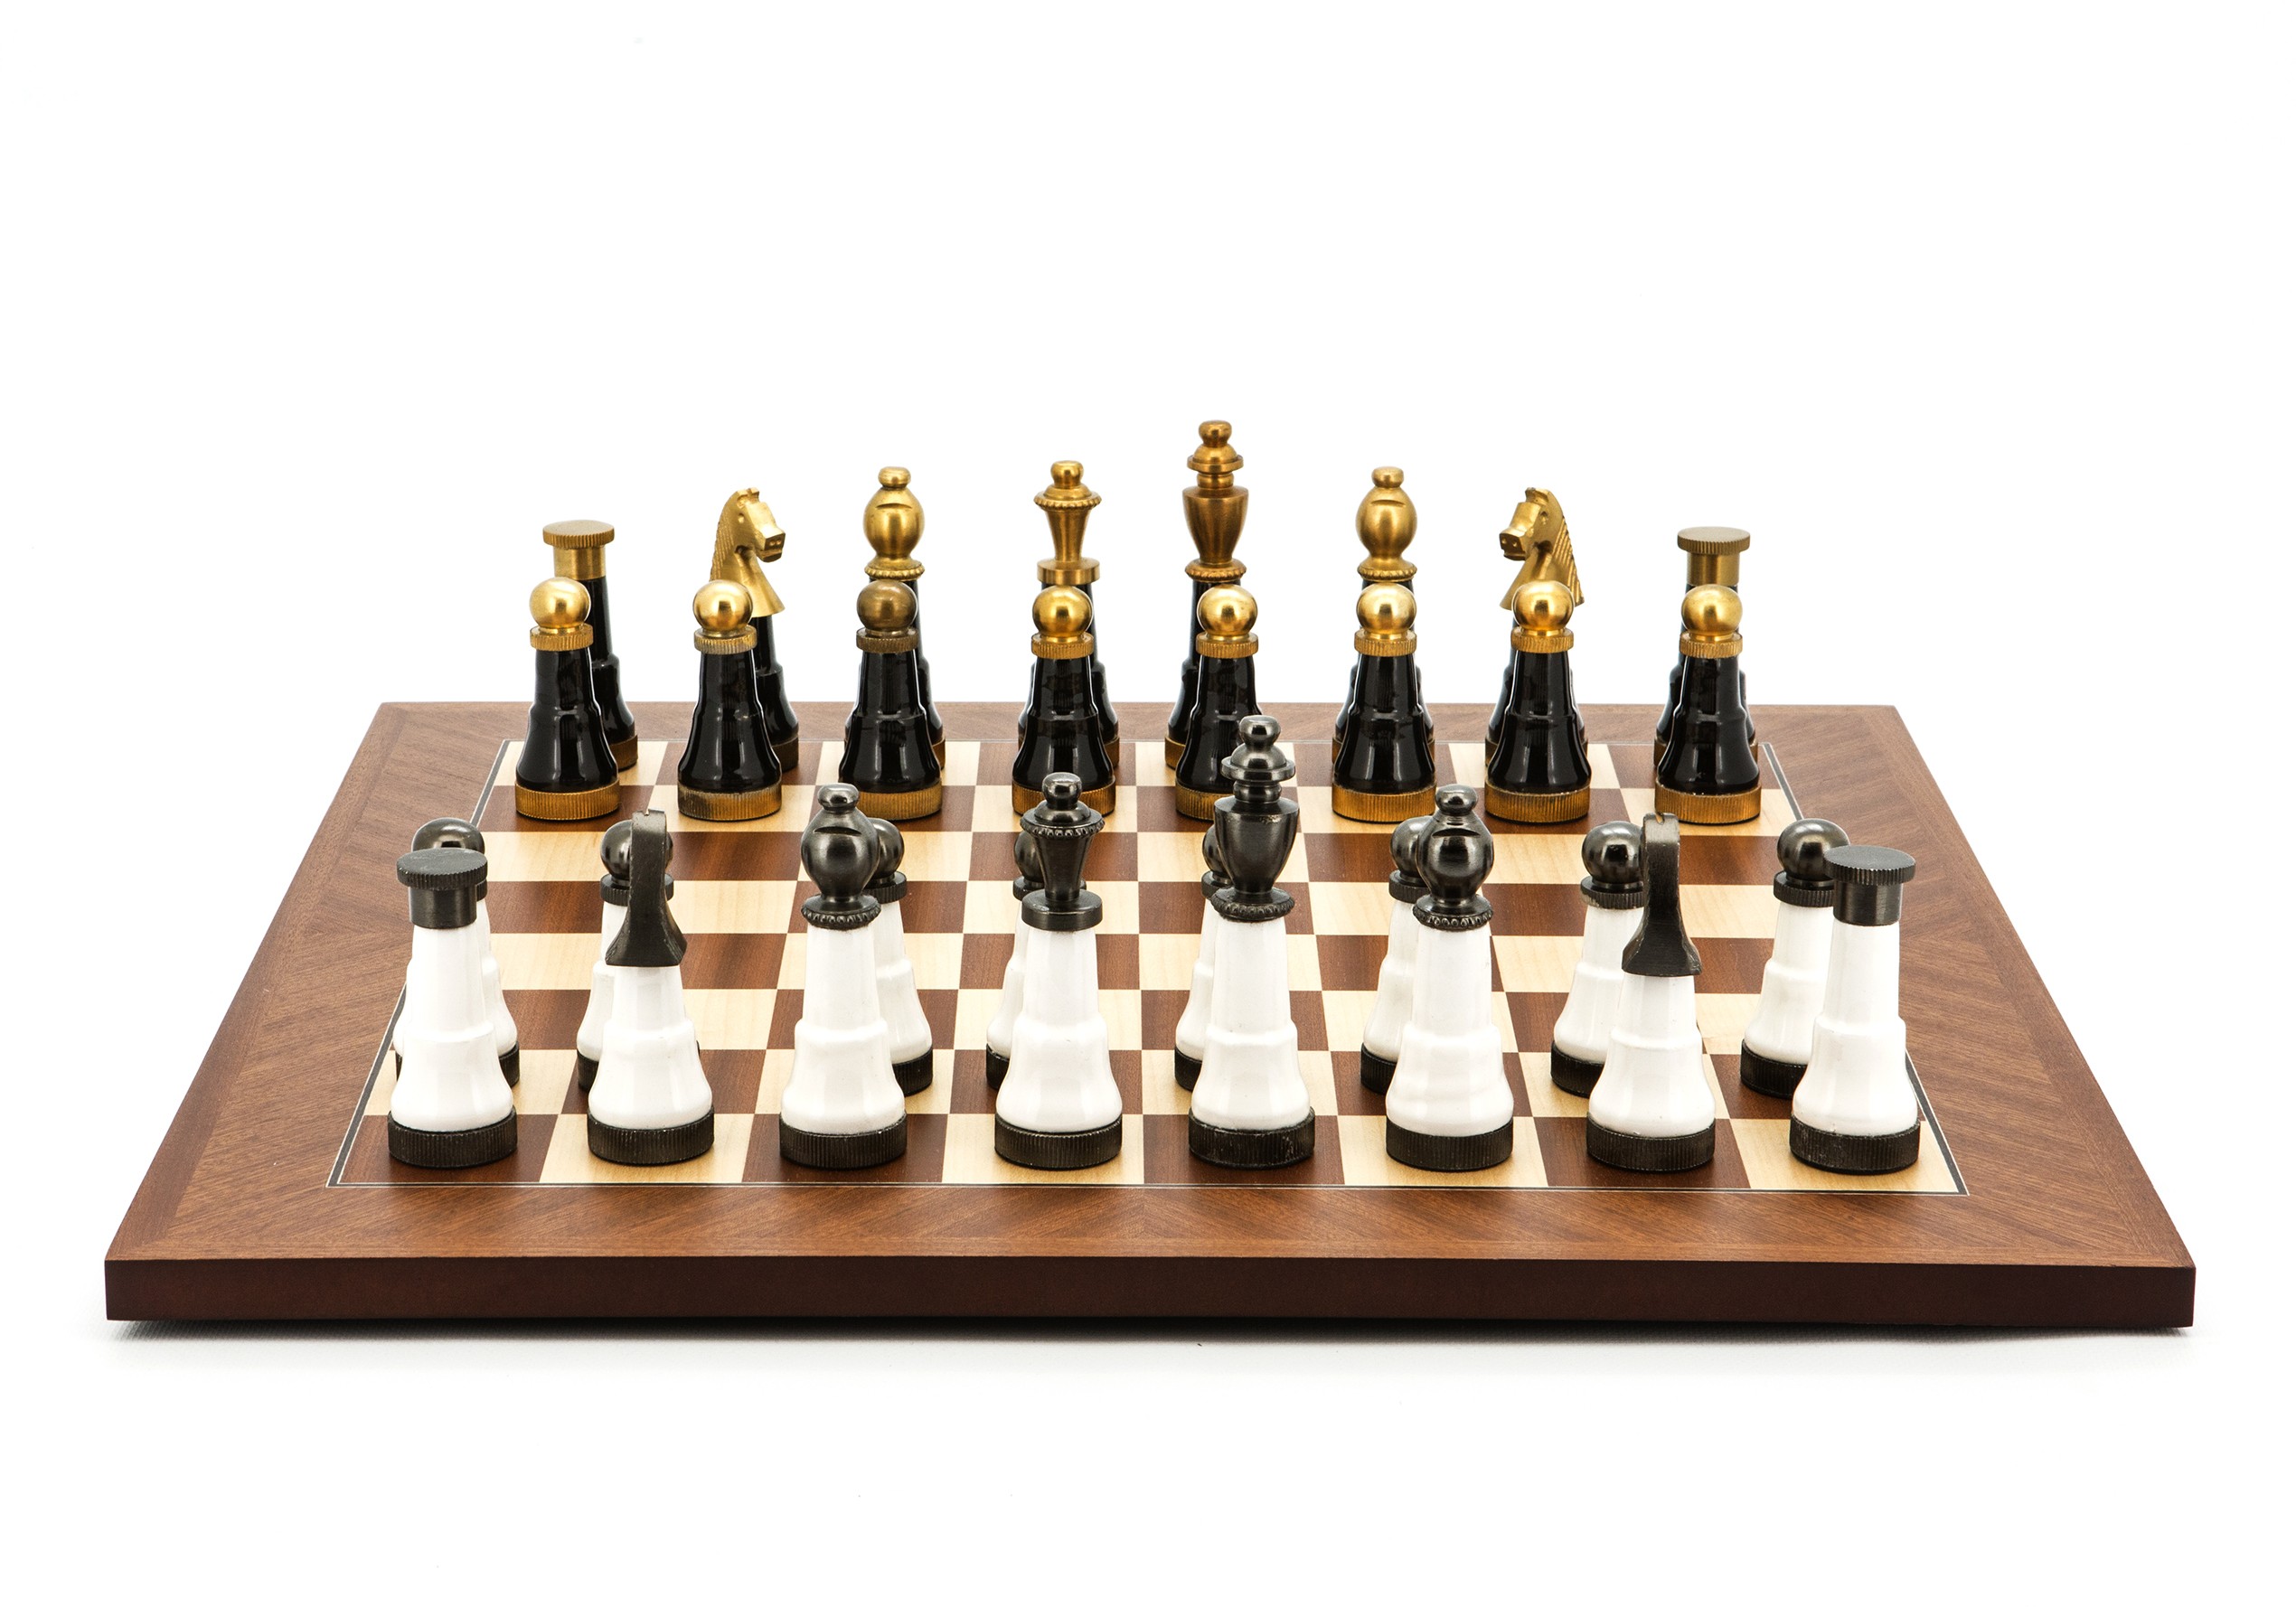 Dal Rossi Italy Chess Set Mahogany Maple Flat Board 50cm, With Black and White with Gold and Gun Metal Tops and Bottoms Chessmen 110mm